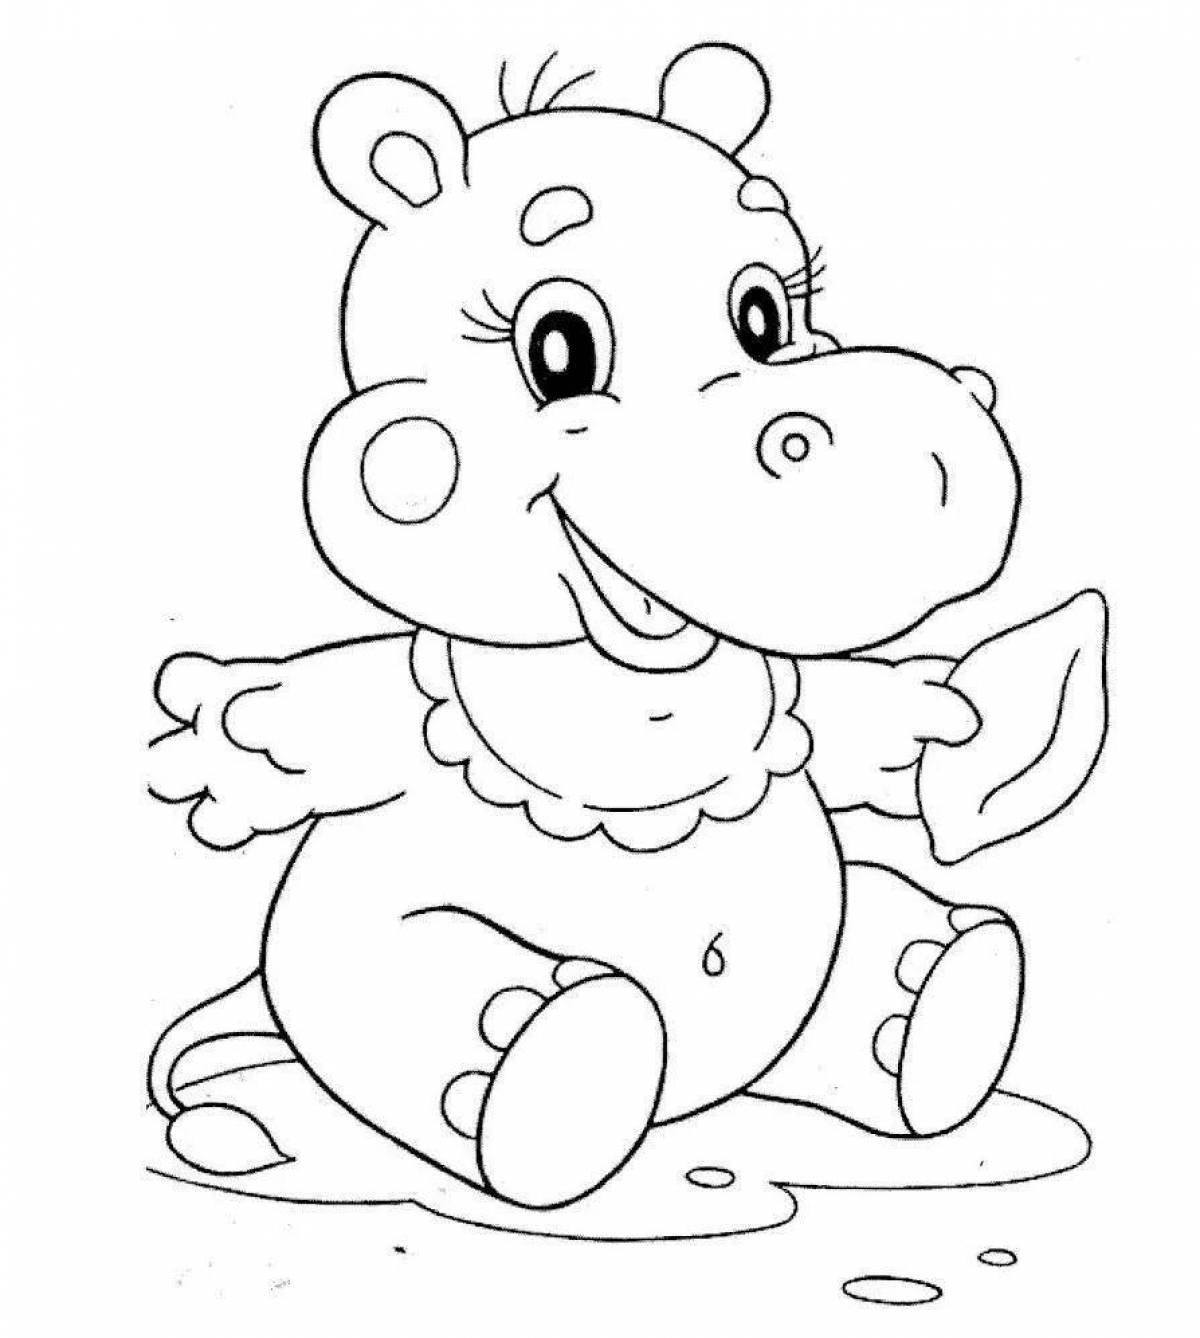 Coloring page hippopotamus for children 3-4 years old